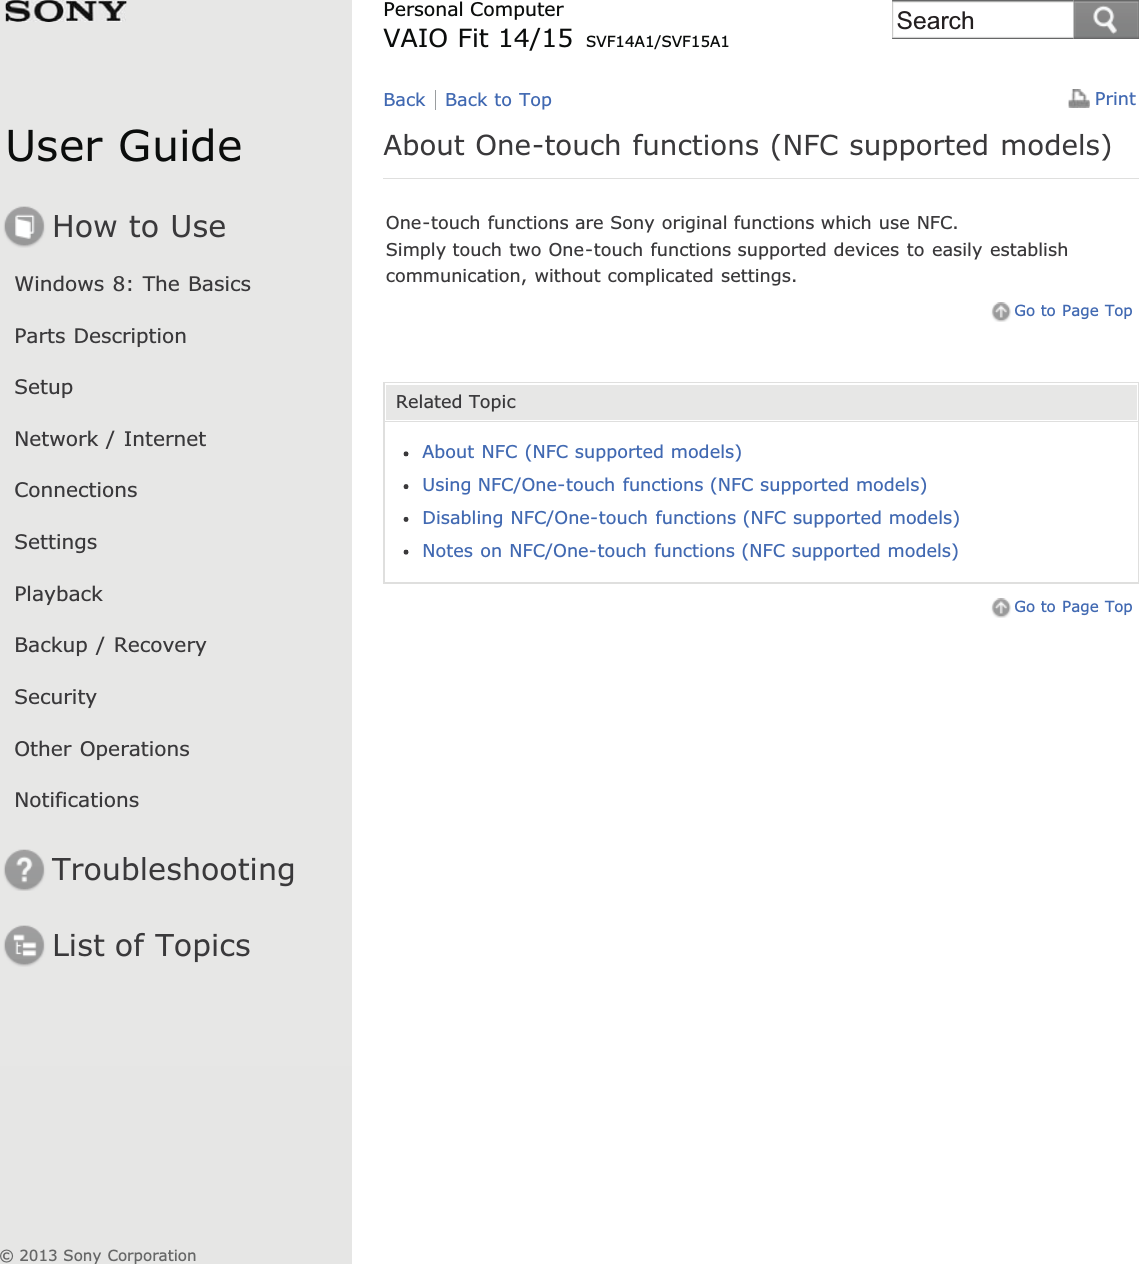 User GuideHow to UseWindows 8: The BasicsParts DescriptionSetupNetwork / InternetConnectionsSettingsPlaybackBackup / RecoverySecurityOther OperationsNotificationsTroubleshootingList of TopicsPrintPersonal ComputerVAIO Fit 14/15 SVF14A1/SVF15A1About One-touch functions (NFC supported models)One-touch functions are Sony original functions which use NFC.Simply touch two One-touch functions supported devices to easily establishcommunication, without complicated settings.Go to Page TopRelated TopicAbout NFC (NFC supported models)Using NFC/One-touch functions (NFC supported models)Disabling NFC/One-touch functions (NFC supported models)Notes on NFC/One-touch functions (NFC supported models)Go to Page TopBack Back to Top© 2013 Sony CorporationSearch